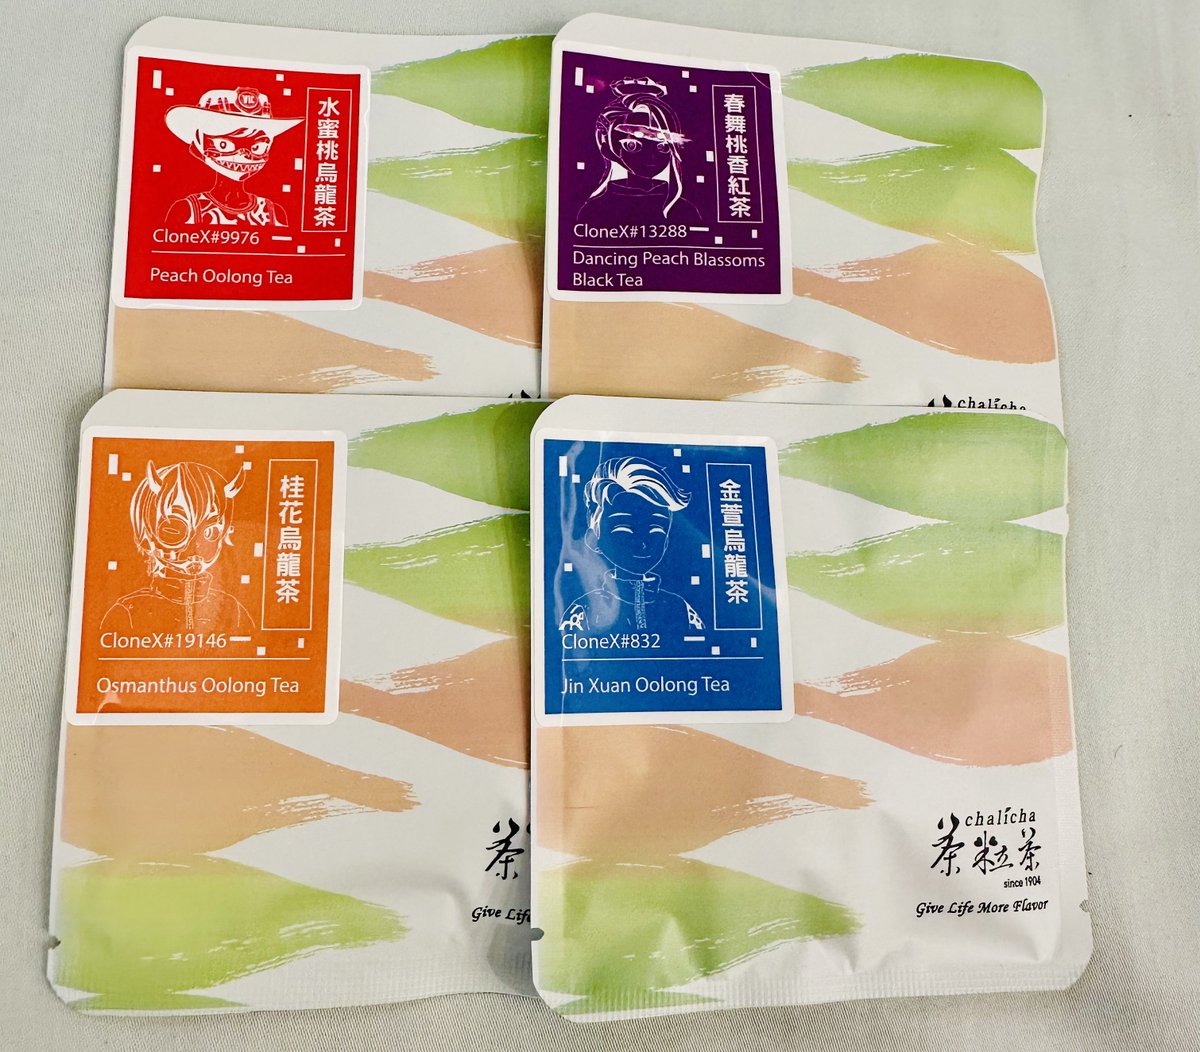 During my exhibition trip to Japan, I wanted to promote Taiwanese products, and while I was thinking about it, Vic, another CloneX holder, came to chat with me over tea. I immediately approached artist PYC for collaboration, and we quickly agreed to create a joint tea packaging.